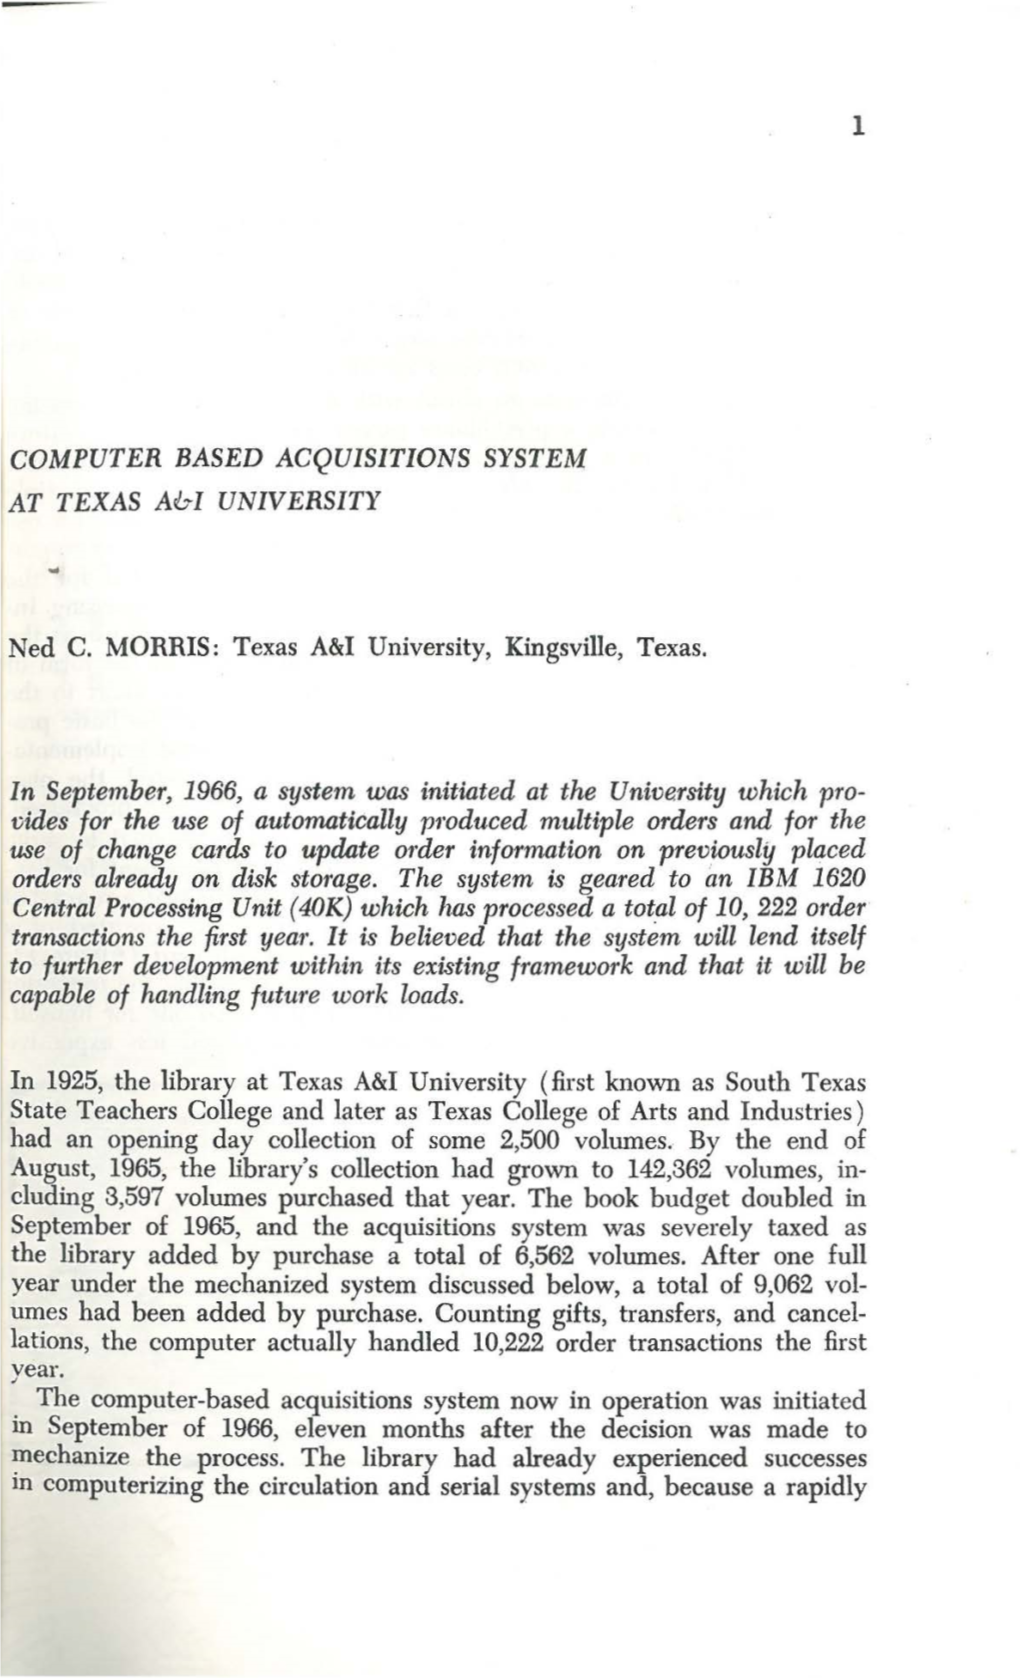 Computer Based Acquisitions System at Texas A&I